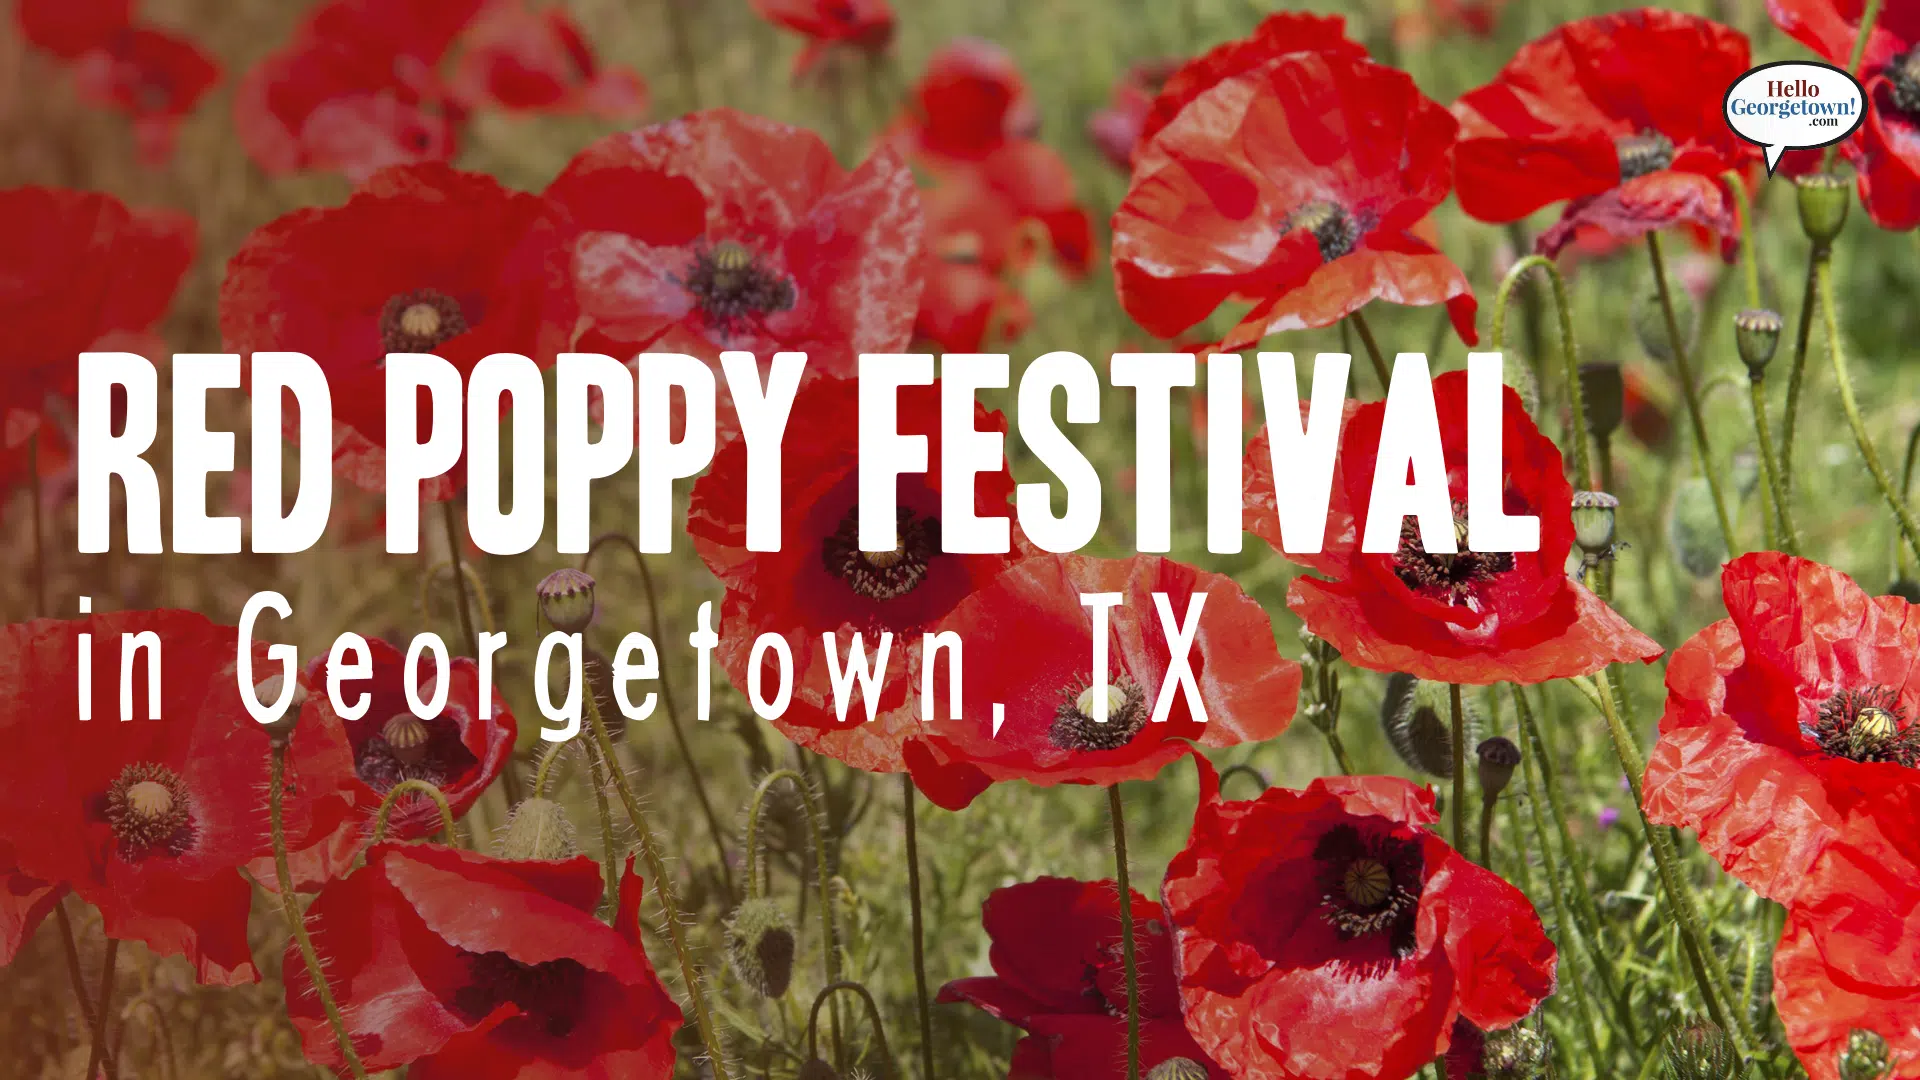 2023 Red Poppy Festival Sponsorship Packet by Visit Georgetown Texas - Issuu